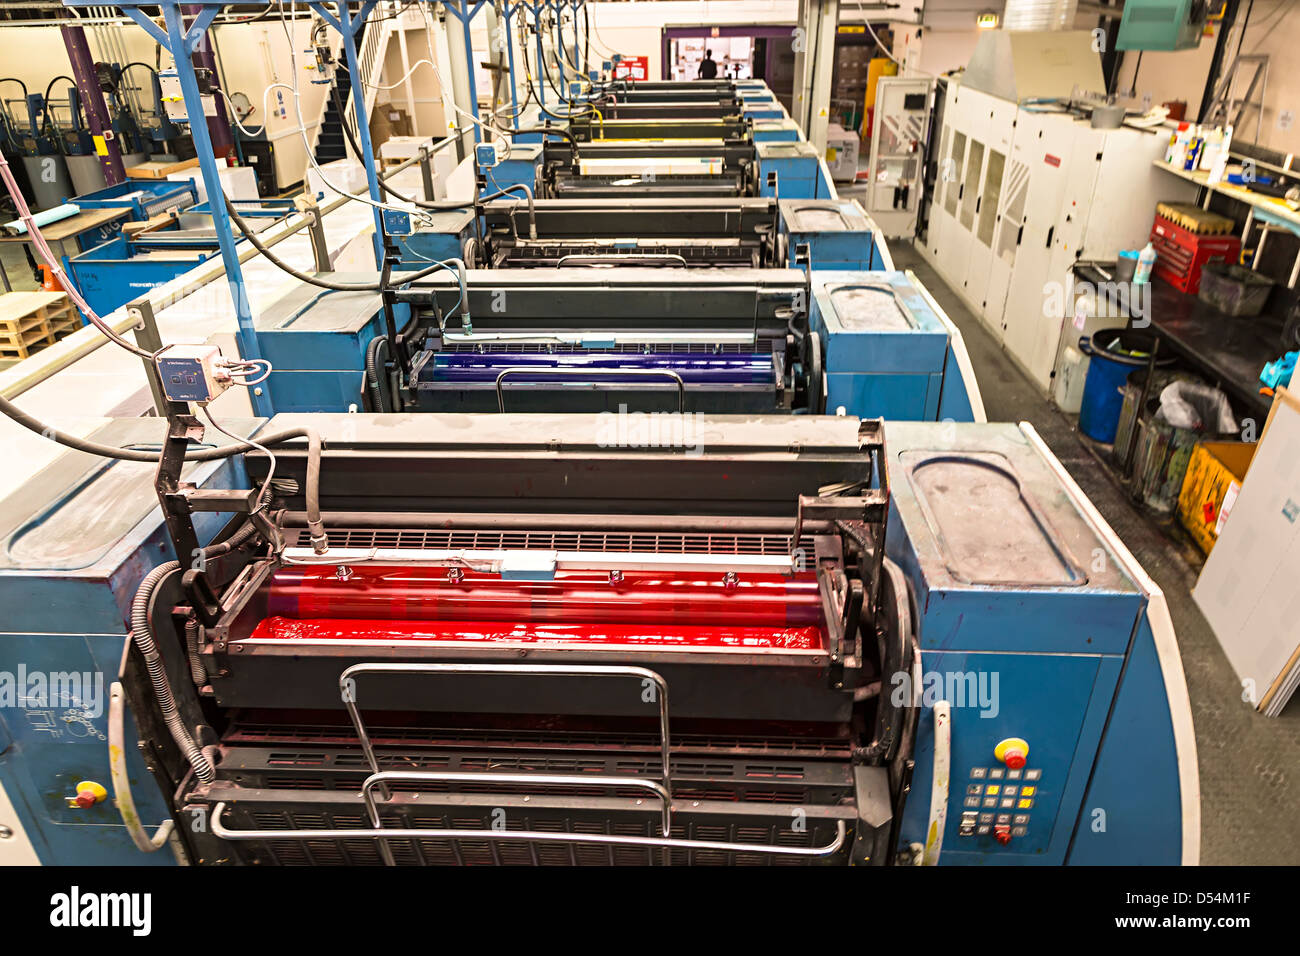 Offset litho printing press showing magenta, cyan, yellow and black inks applied from rollers, Aberystwyth, Wales, UK Stock Photo